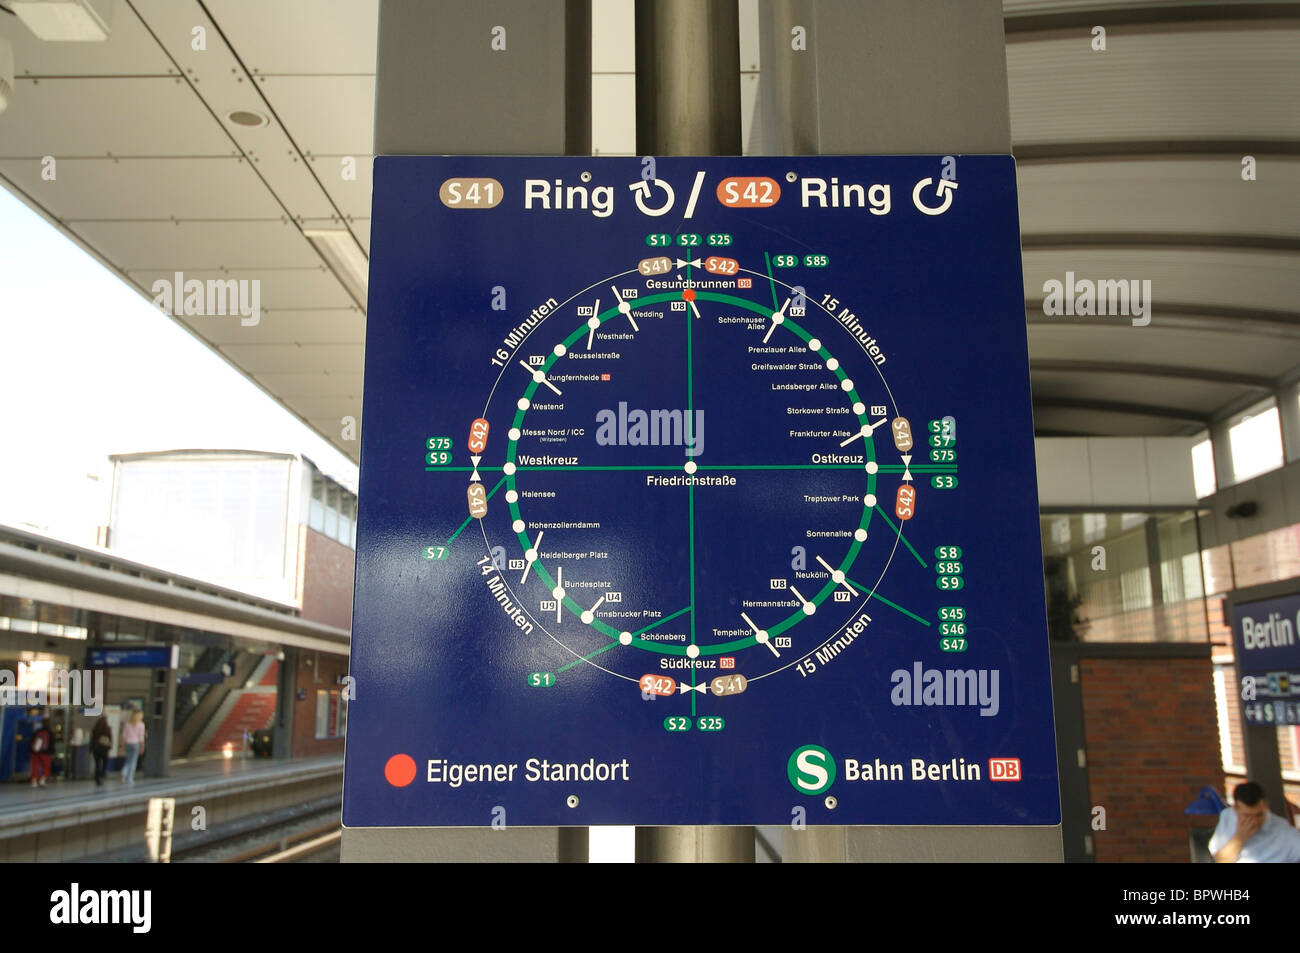 S-Bahn Ring map with train stations location information on it at a station  in Berlin Stock Photo - Alamy